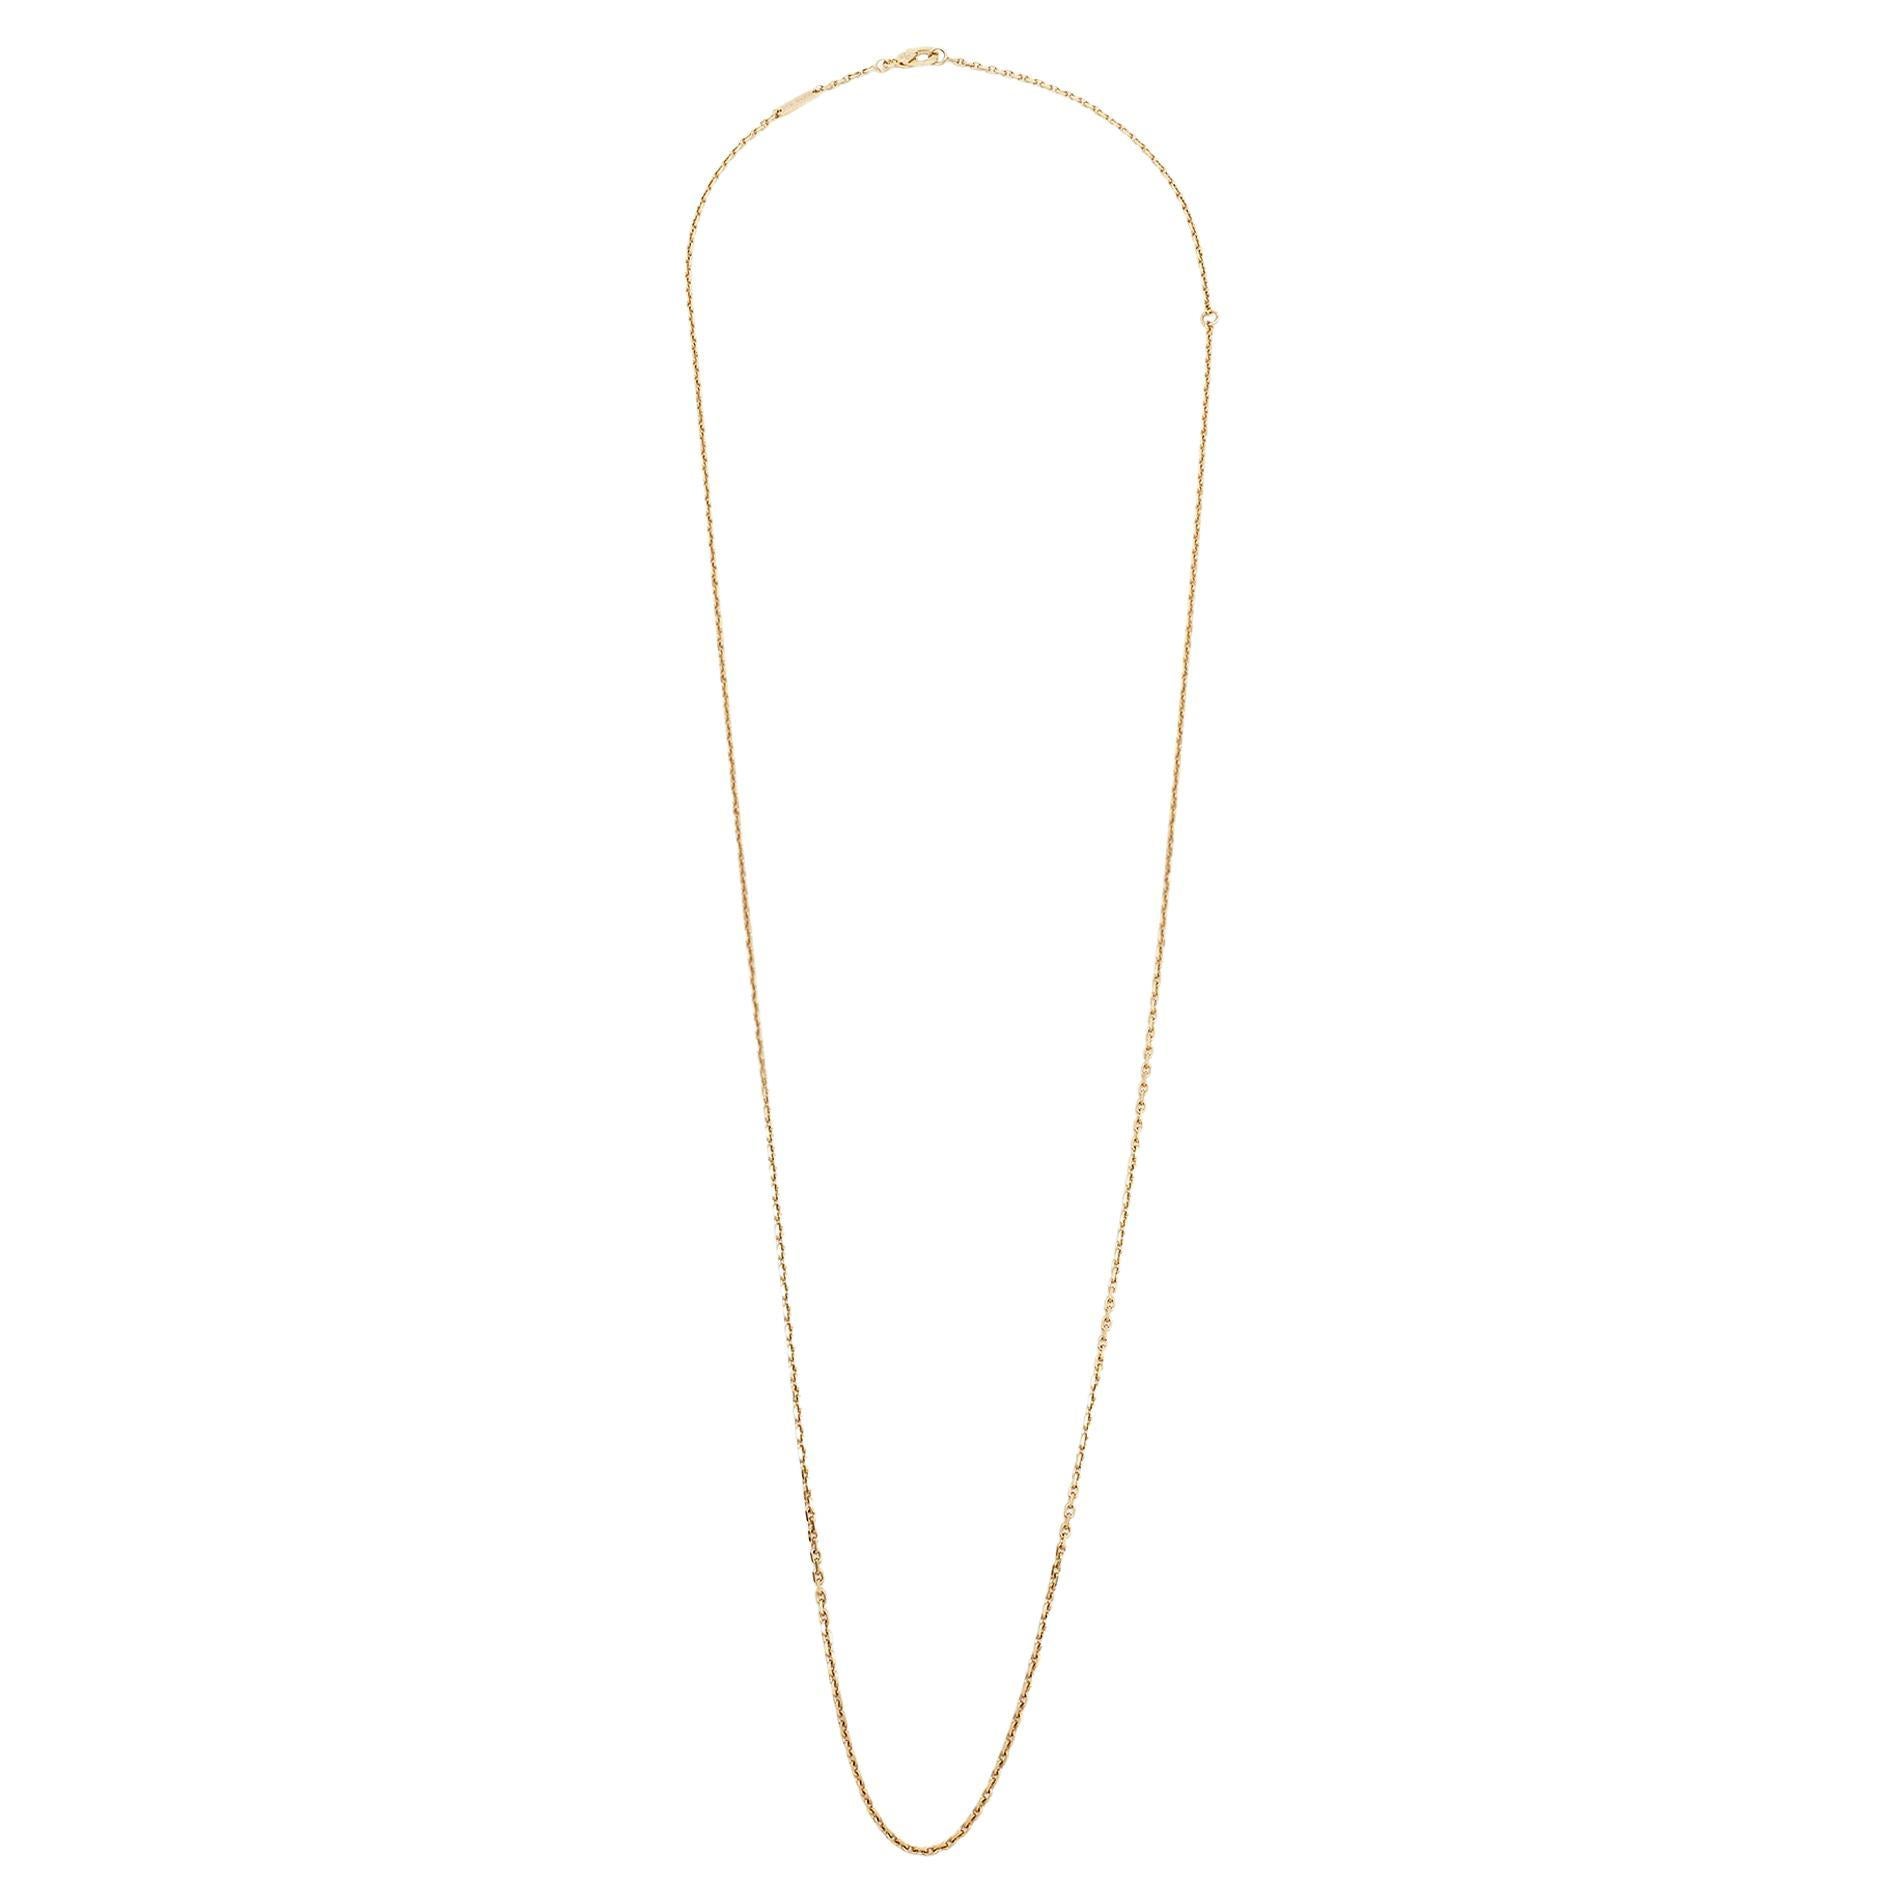 Van Cleef & Arpels Trace 18k Yellow Gold Chain